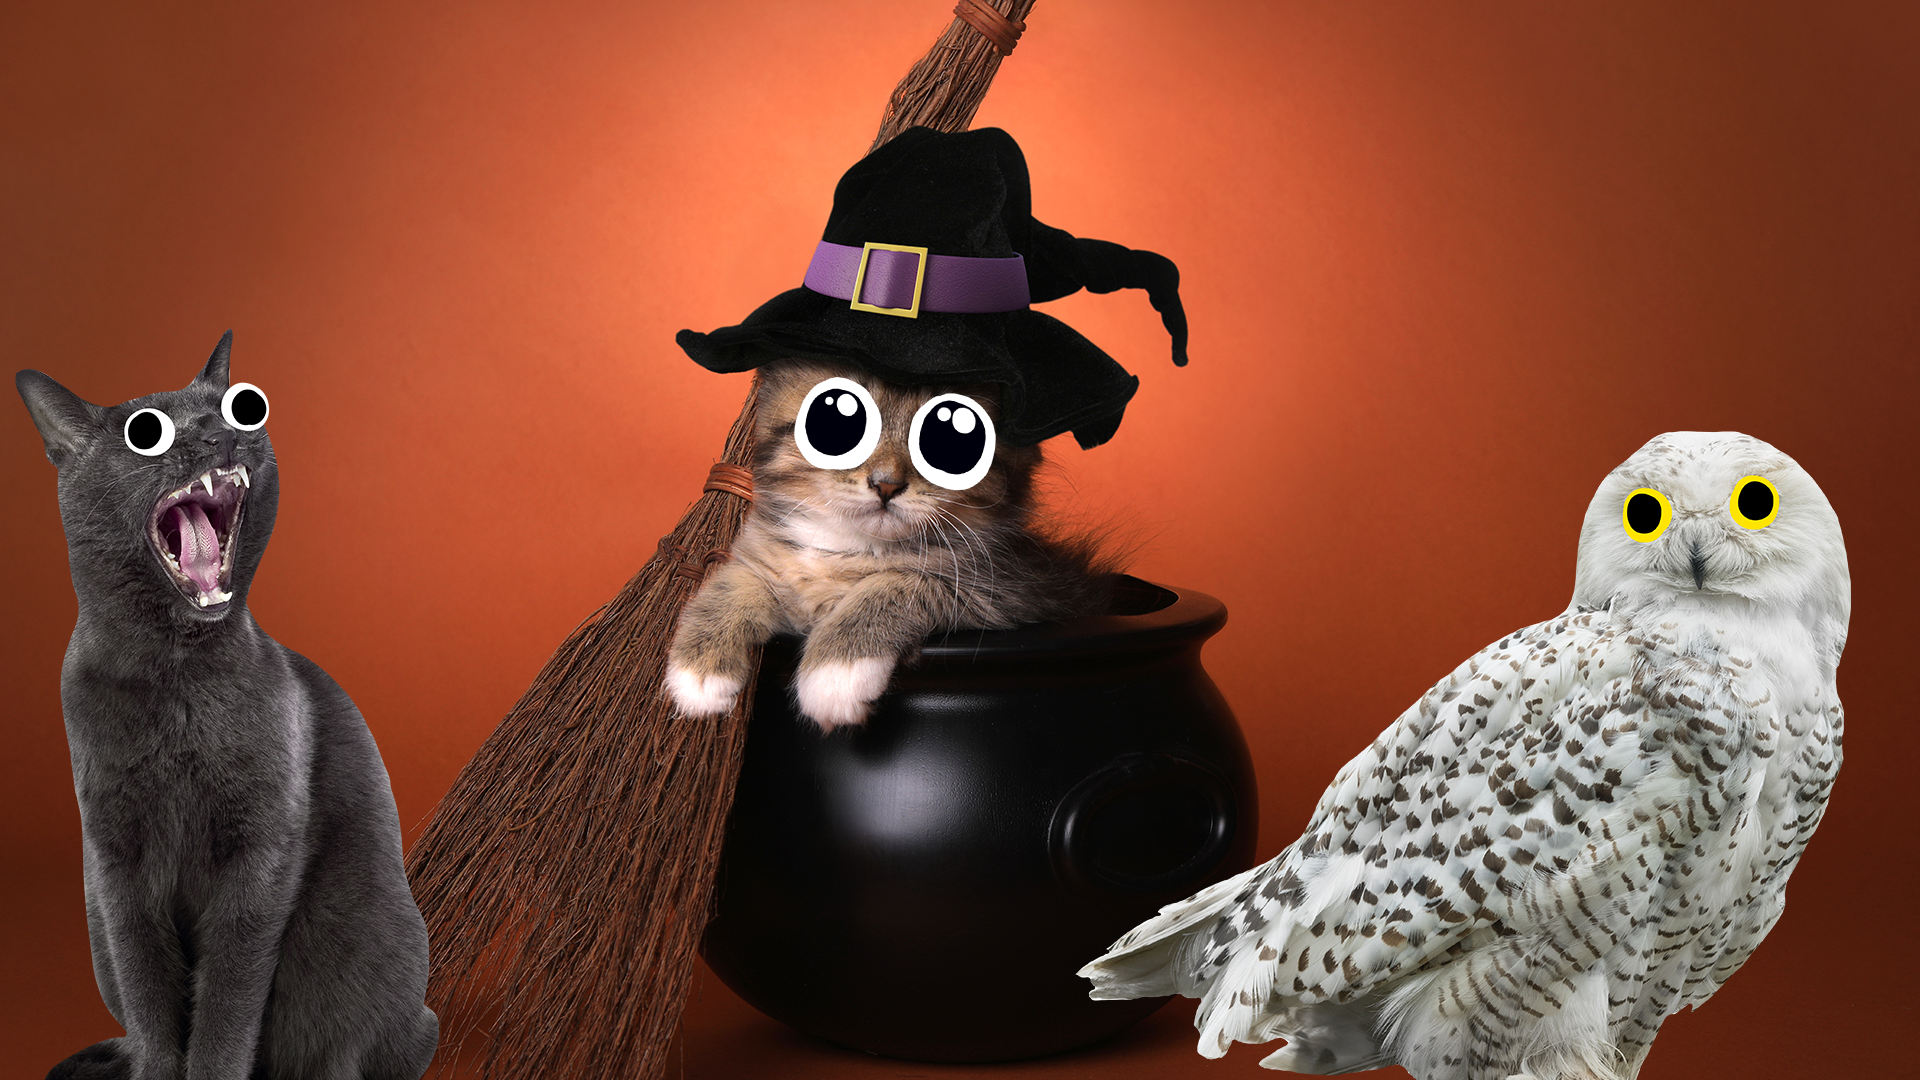 A kitten in a witch's hat, a meowing cat and an owl